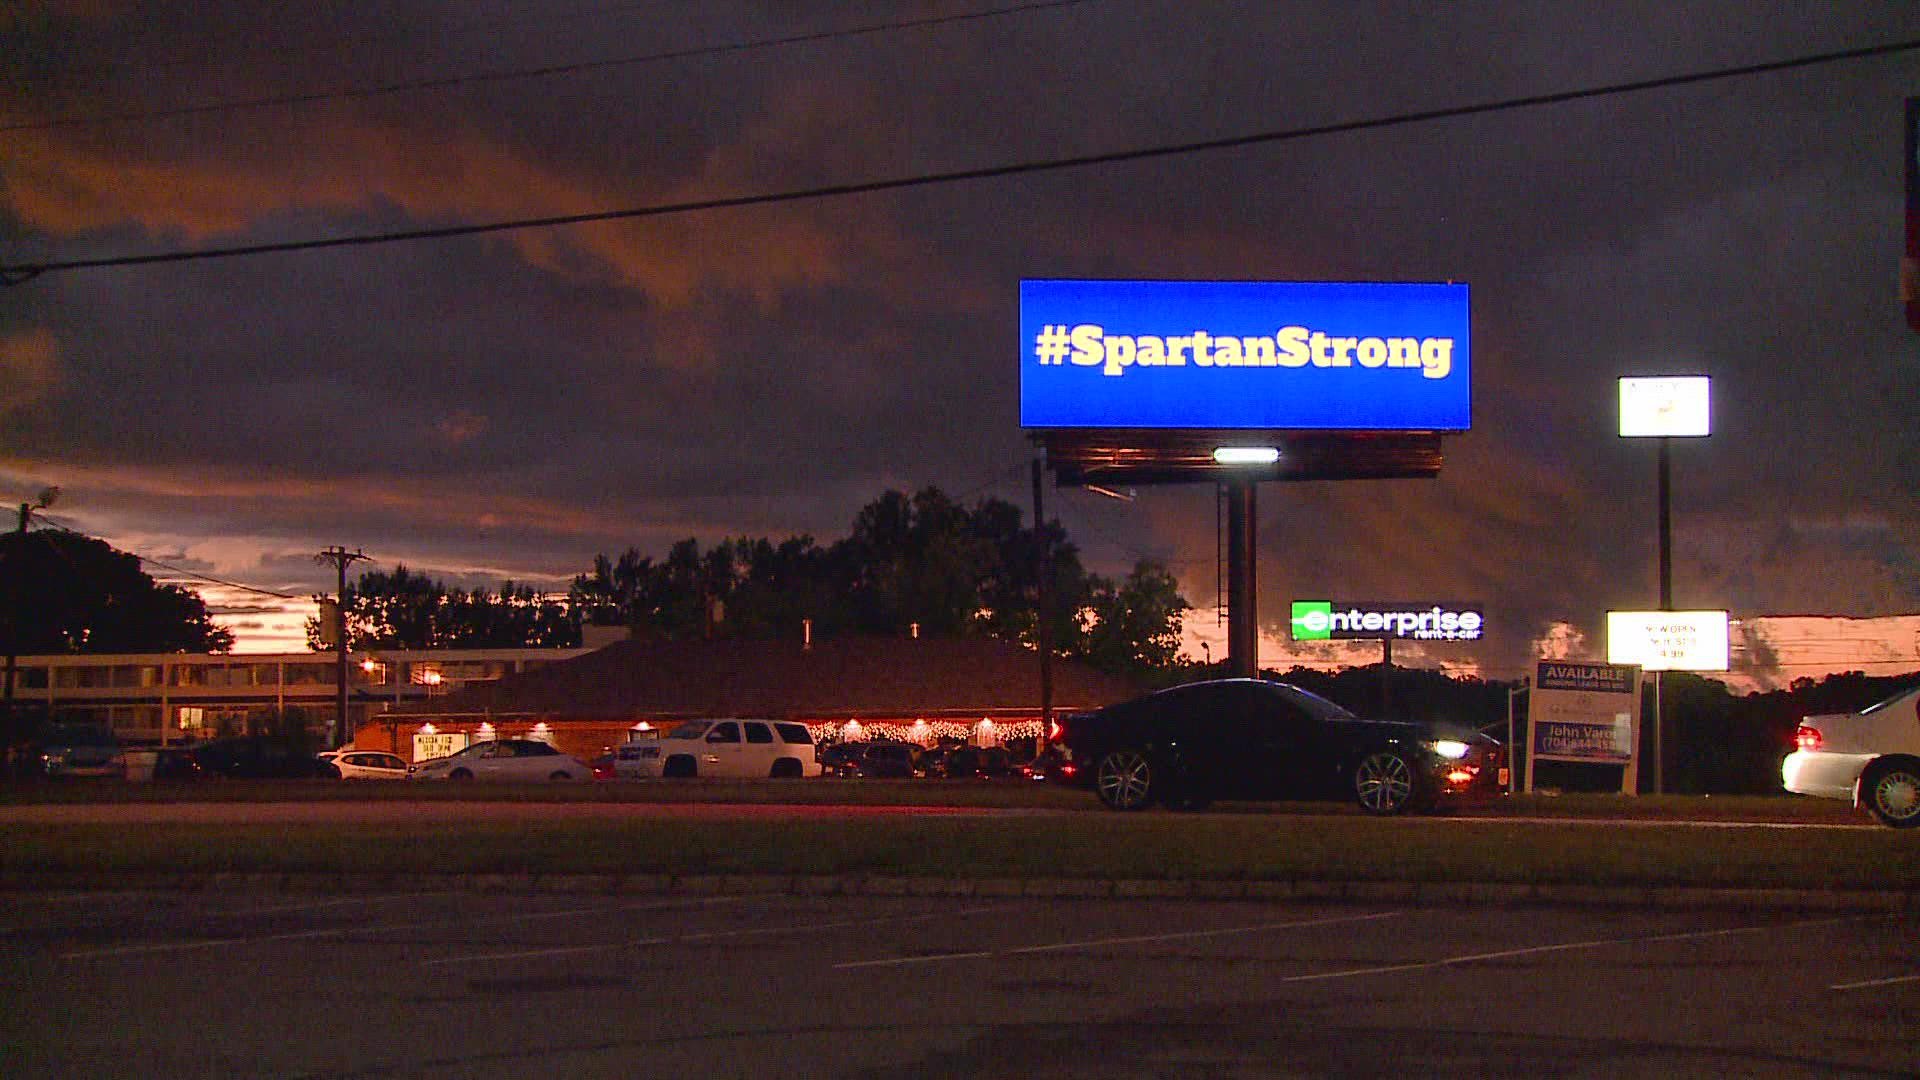 A digital billboard was put up Wednesday night just hours after a deadly school shooting at Mount Tabor High.